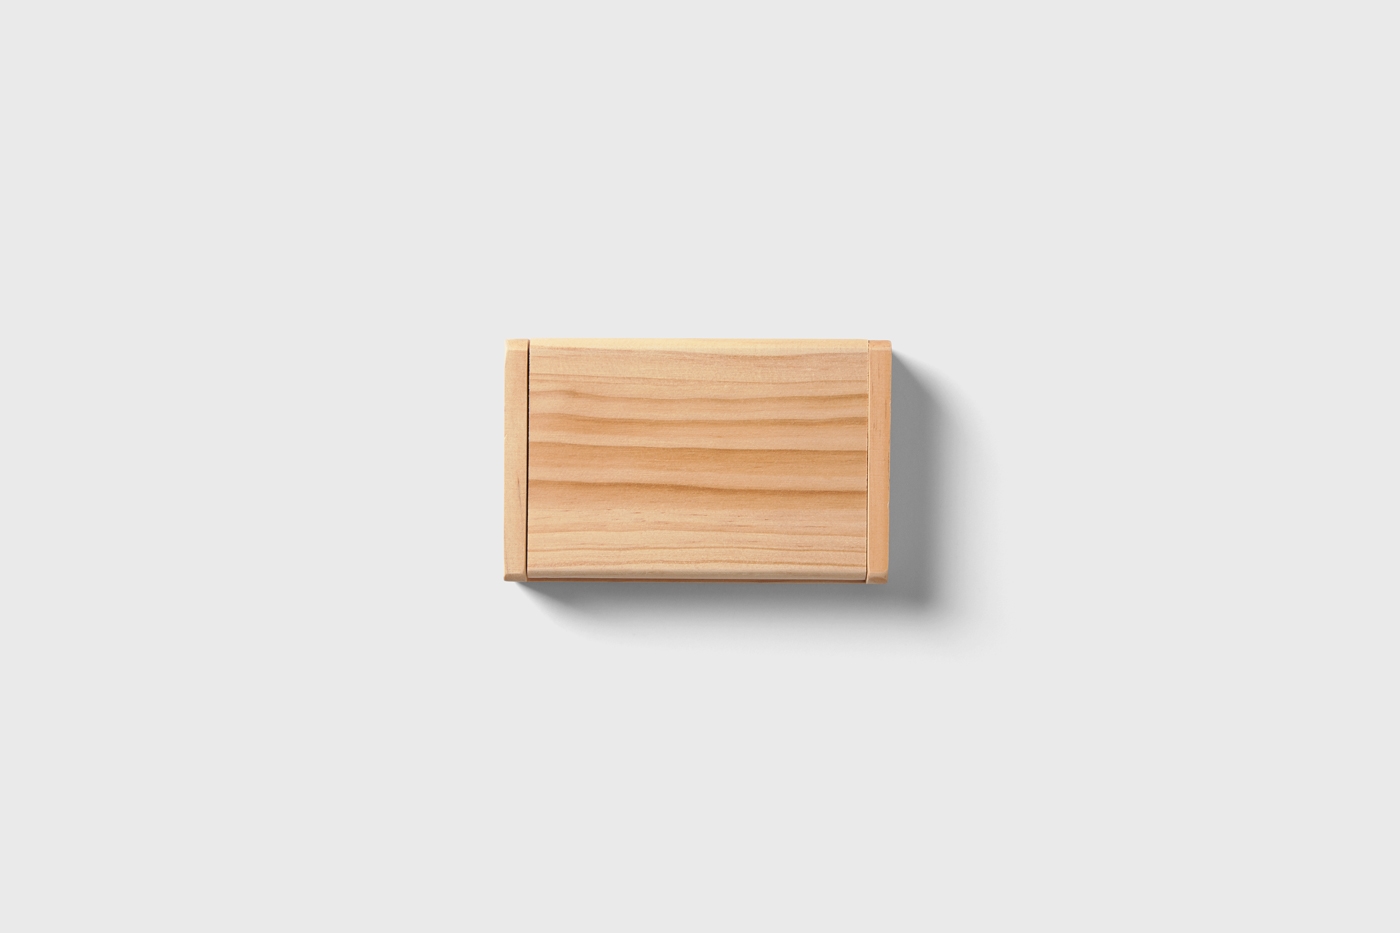 Top View of Simple Small Wooden Box Mockup FREE PSD